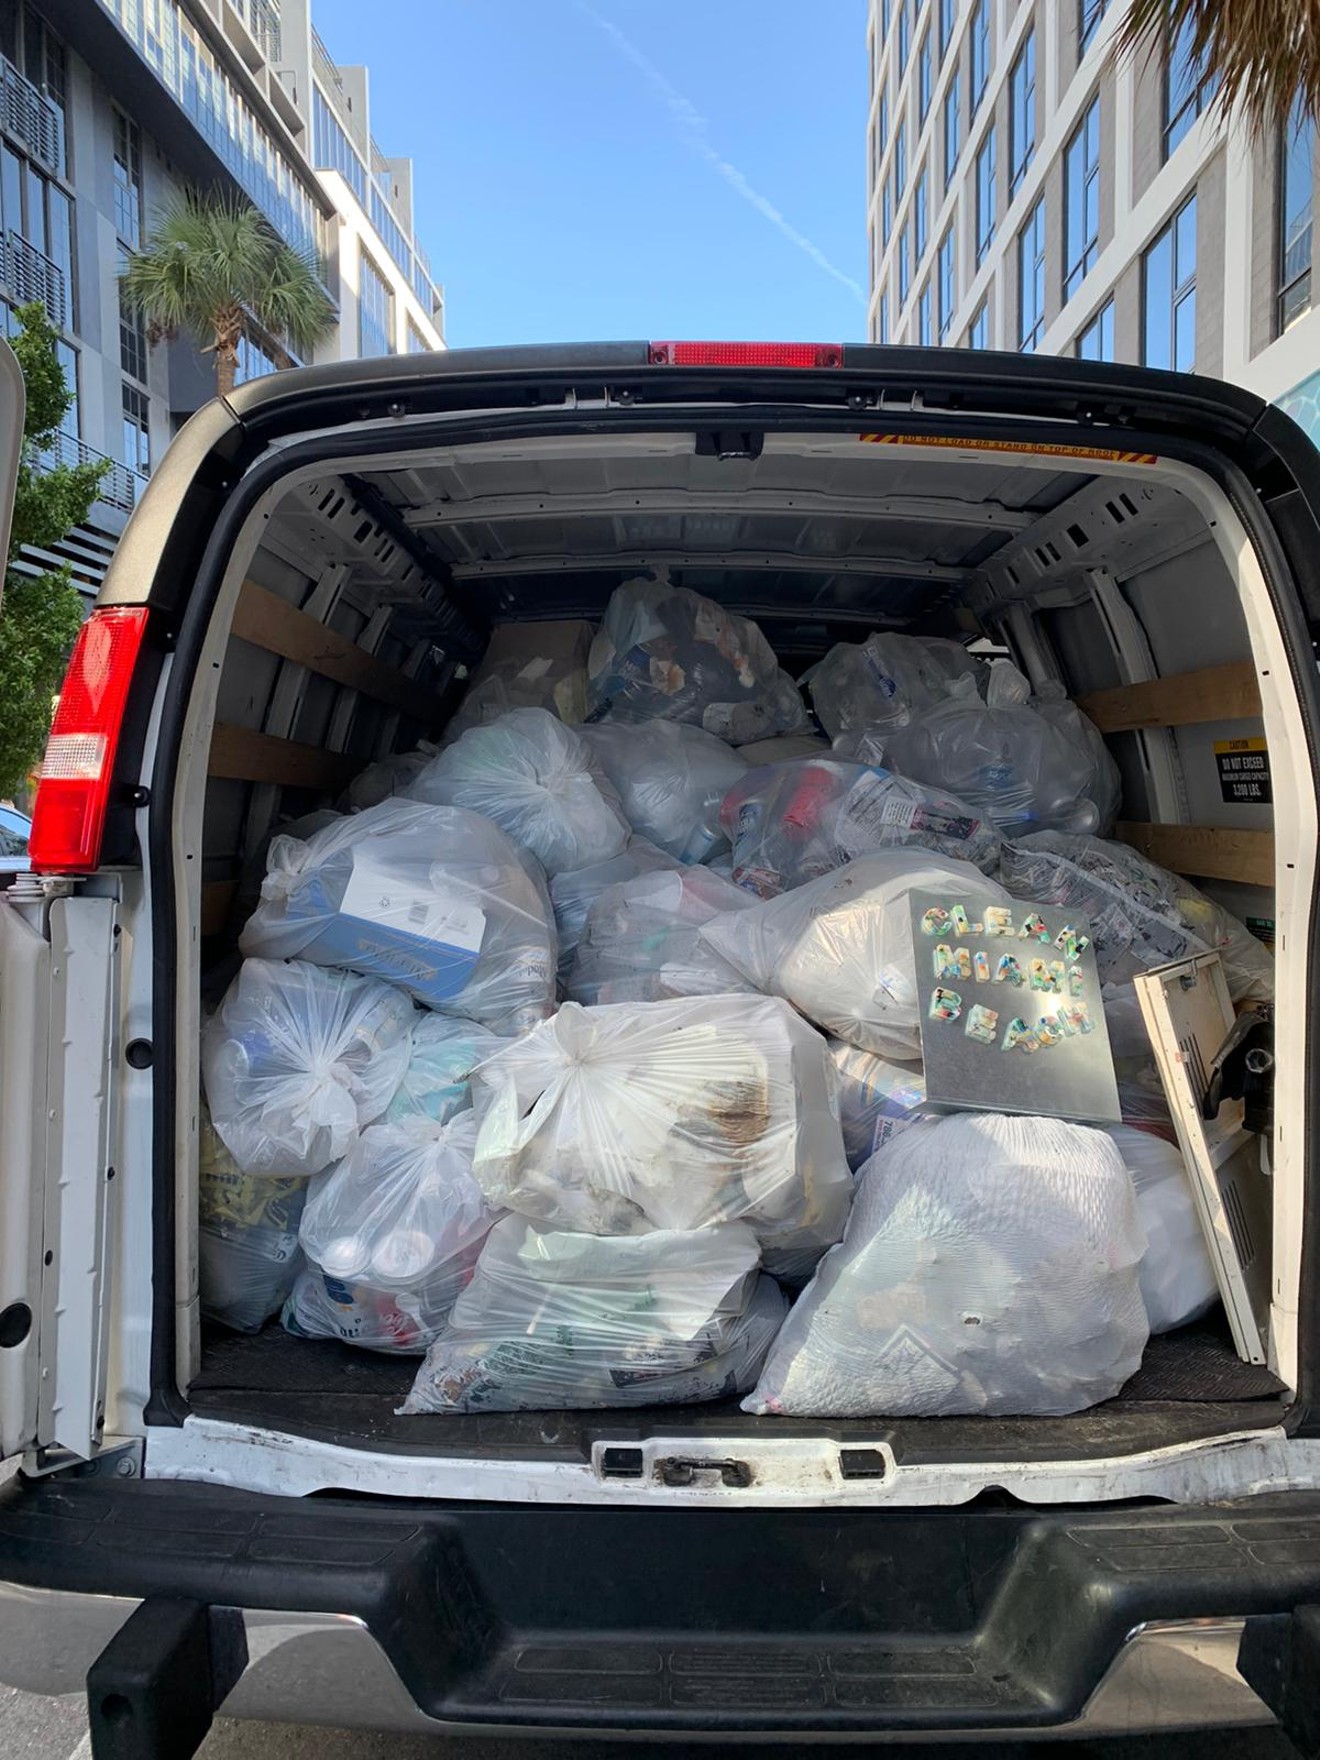 Volunteers picked up so much litter they couldn't fit it all in the back of a van.